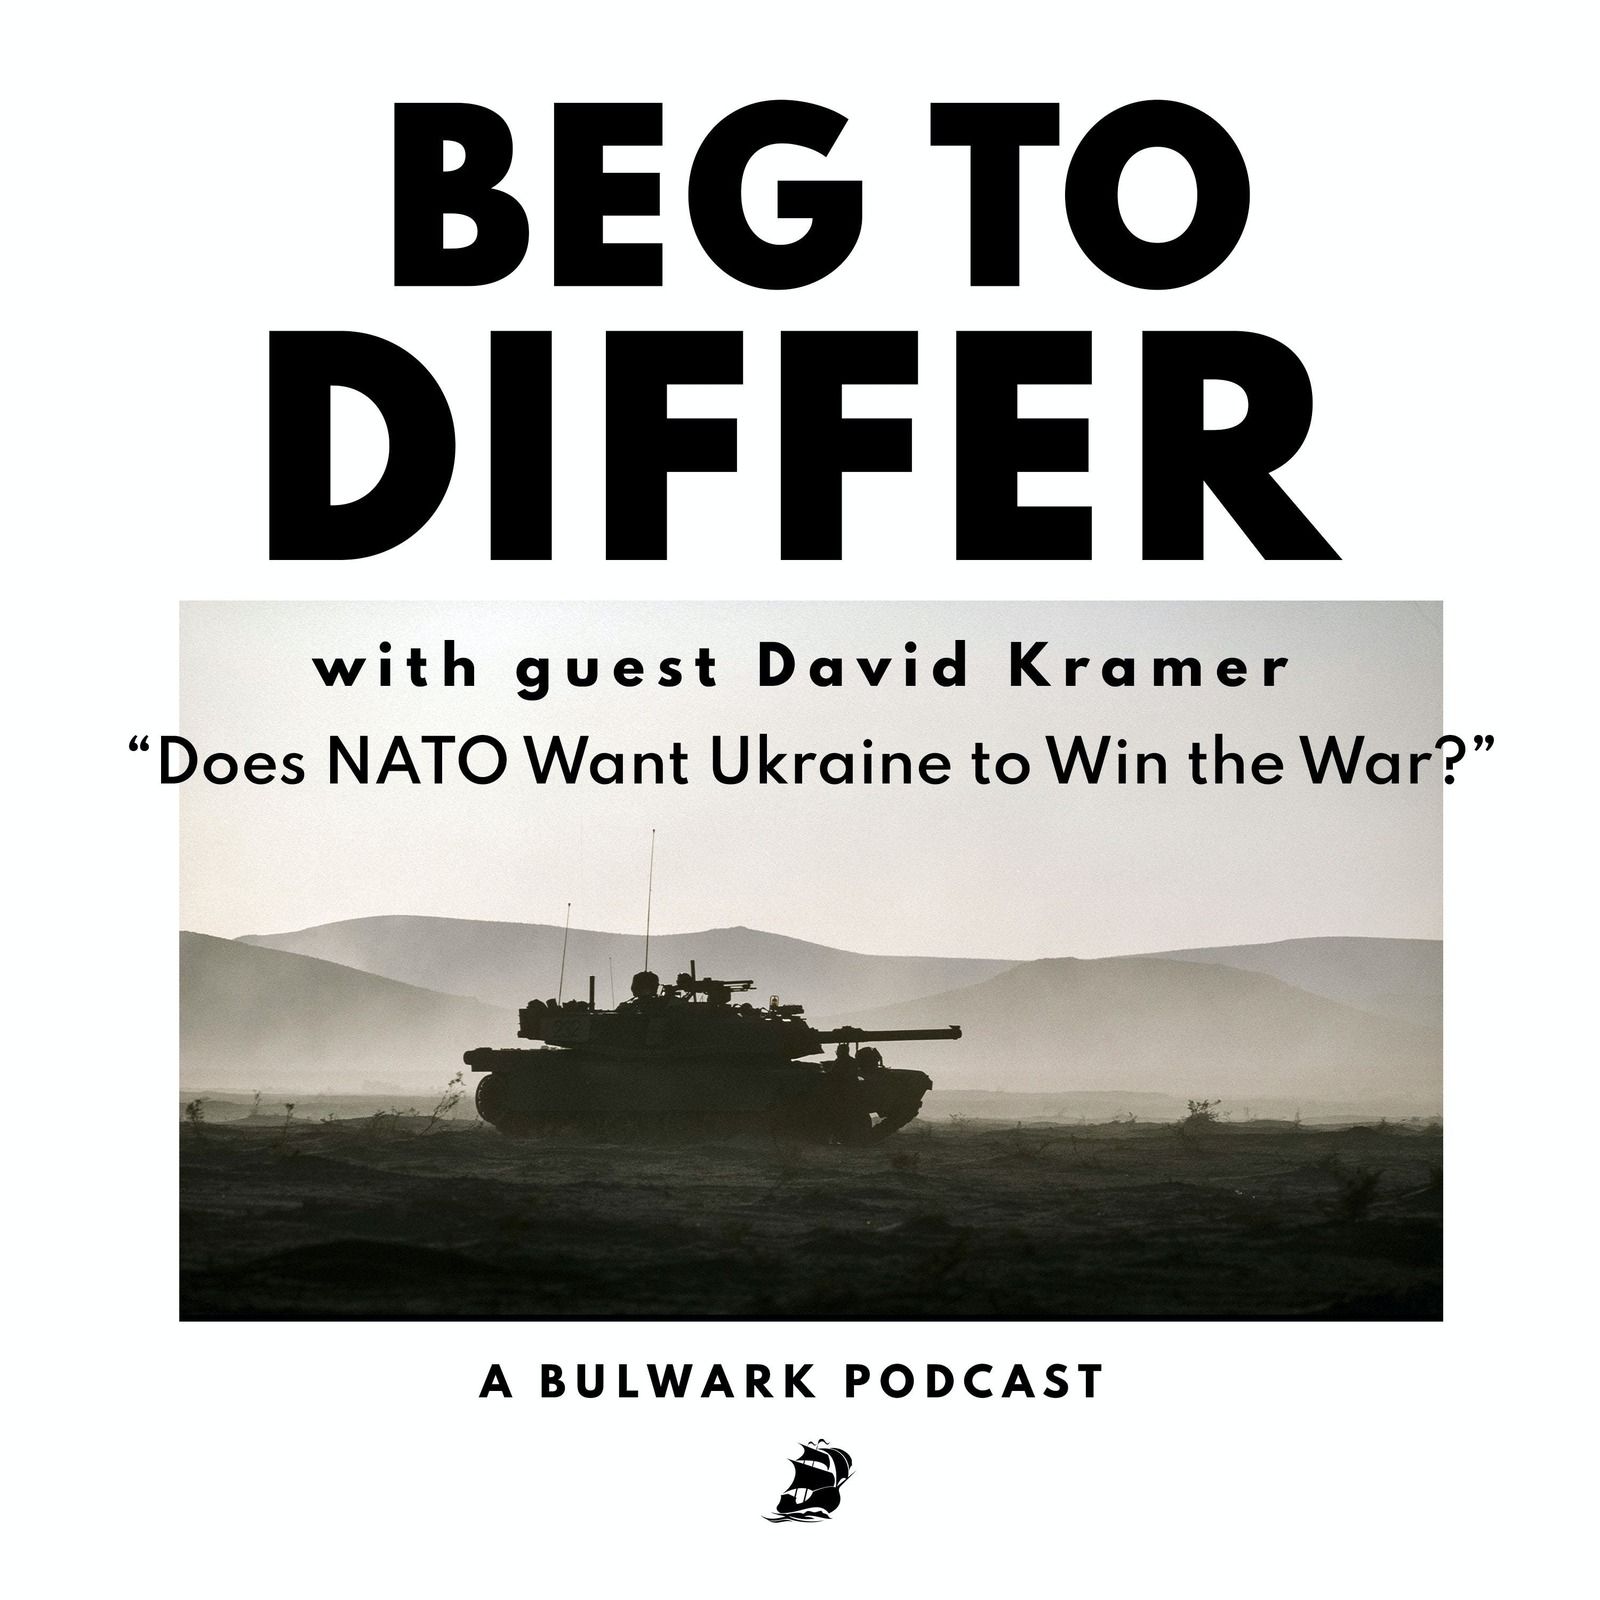 Does NATO Want Ukraine to Win the War?